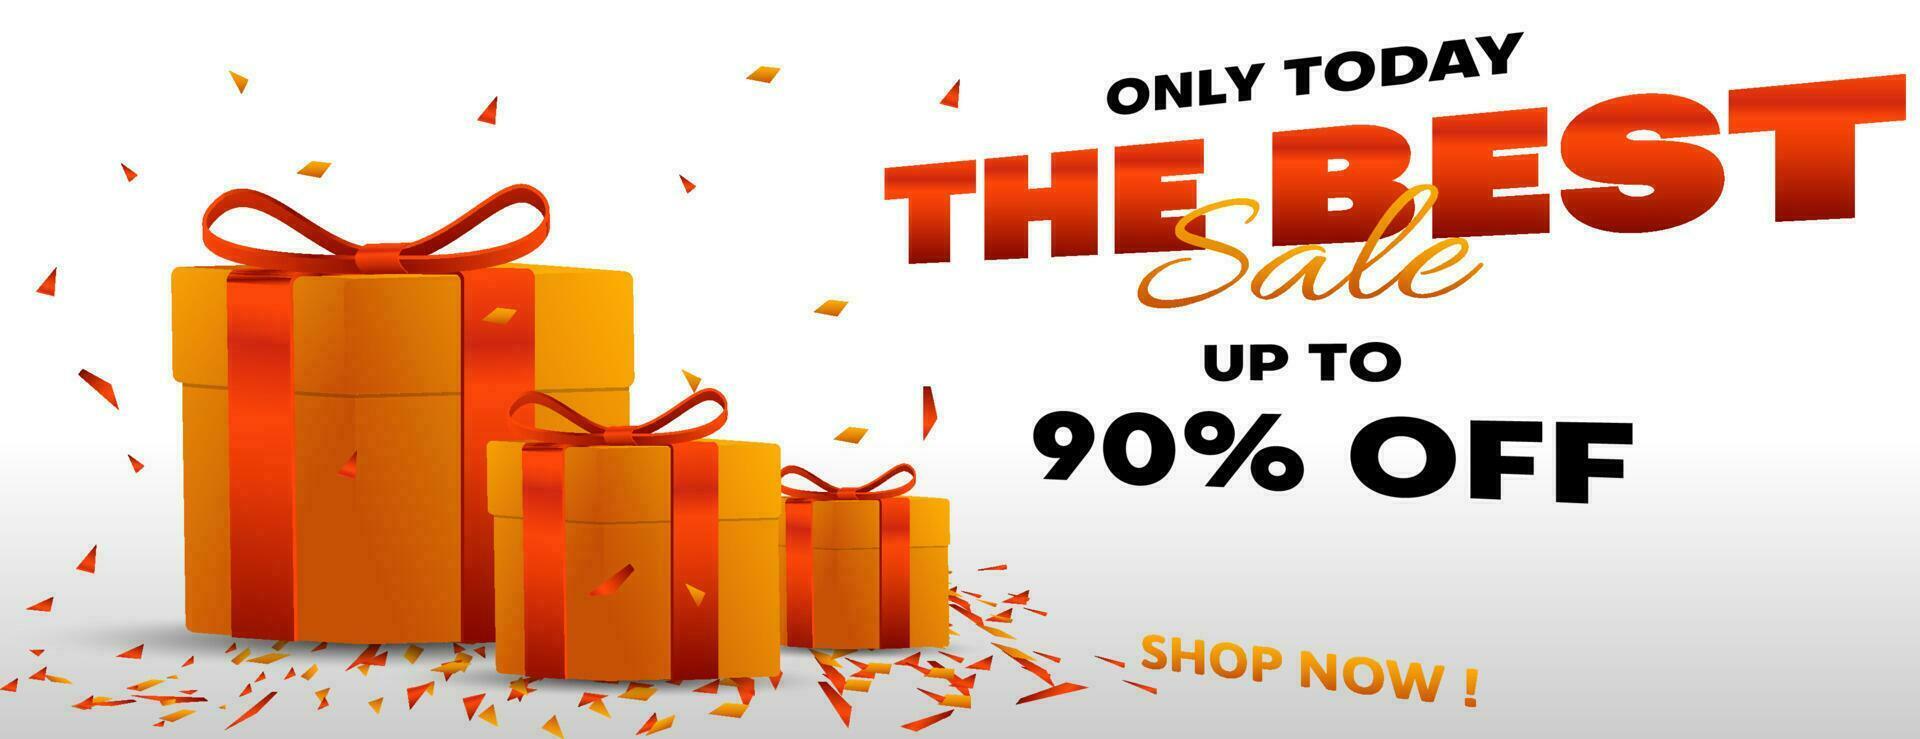 the best sale banner with up to 90 percent off discount with only today vector